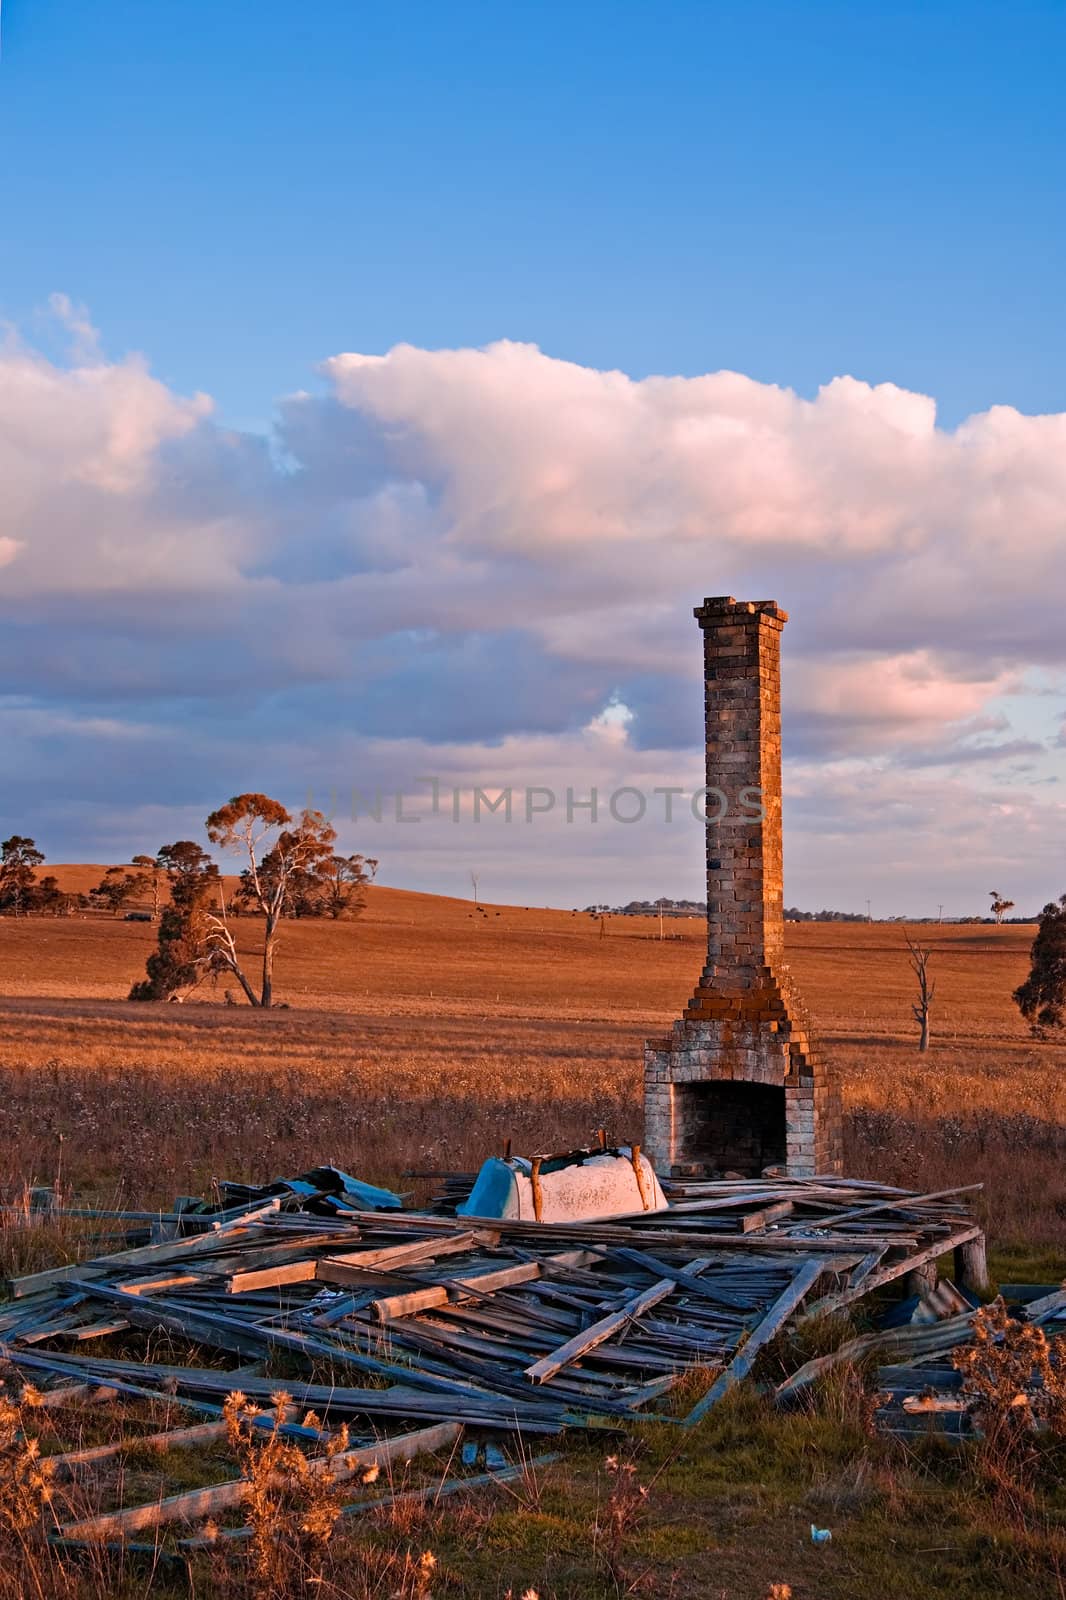 all that is left of this old farmhouse is a chimney, a pile of wood and an upturned bath